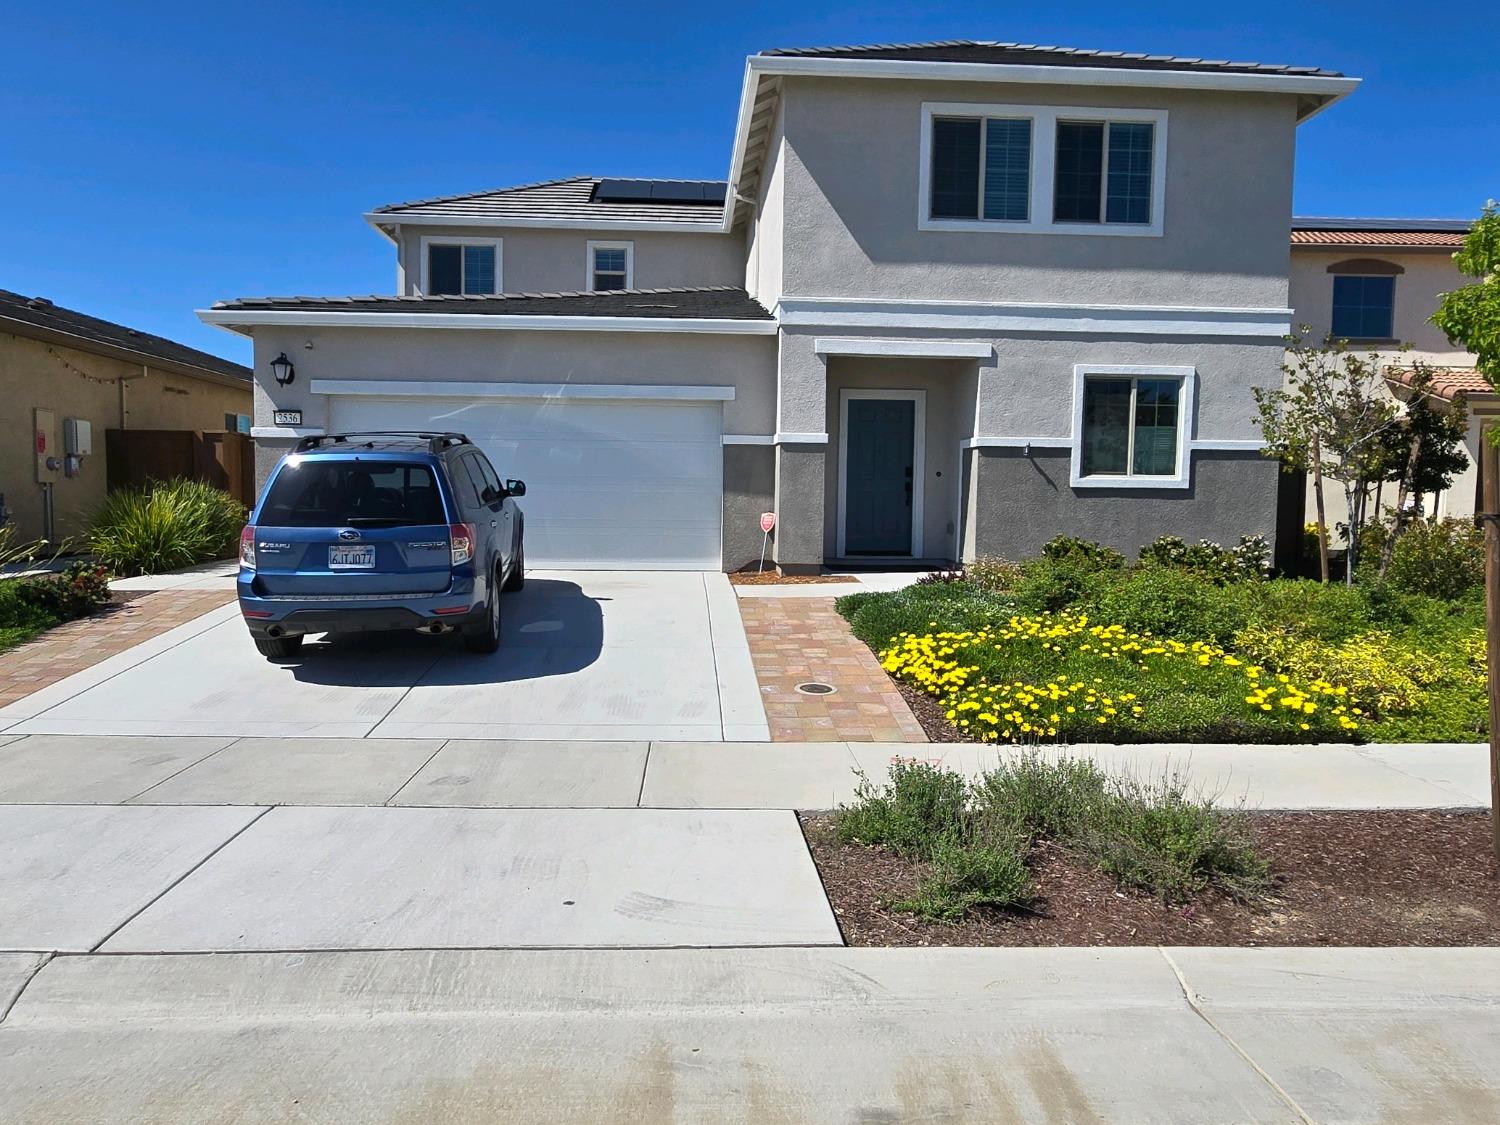 Photo of 2536 Provincetown Wy in Roseville, CA